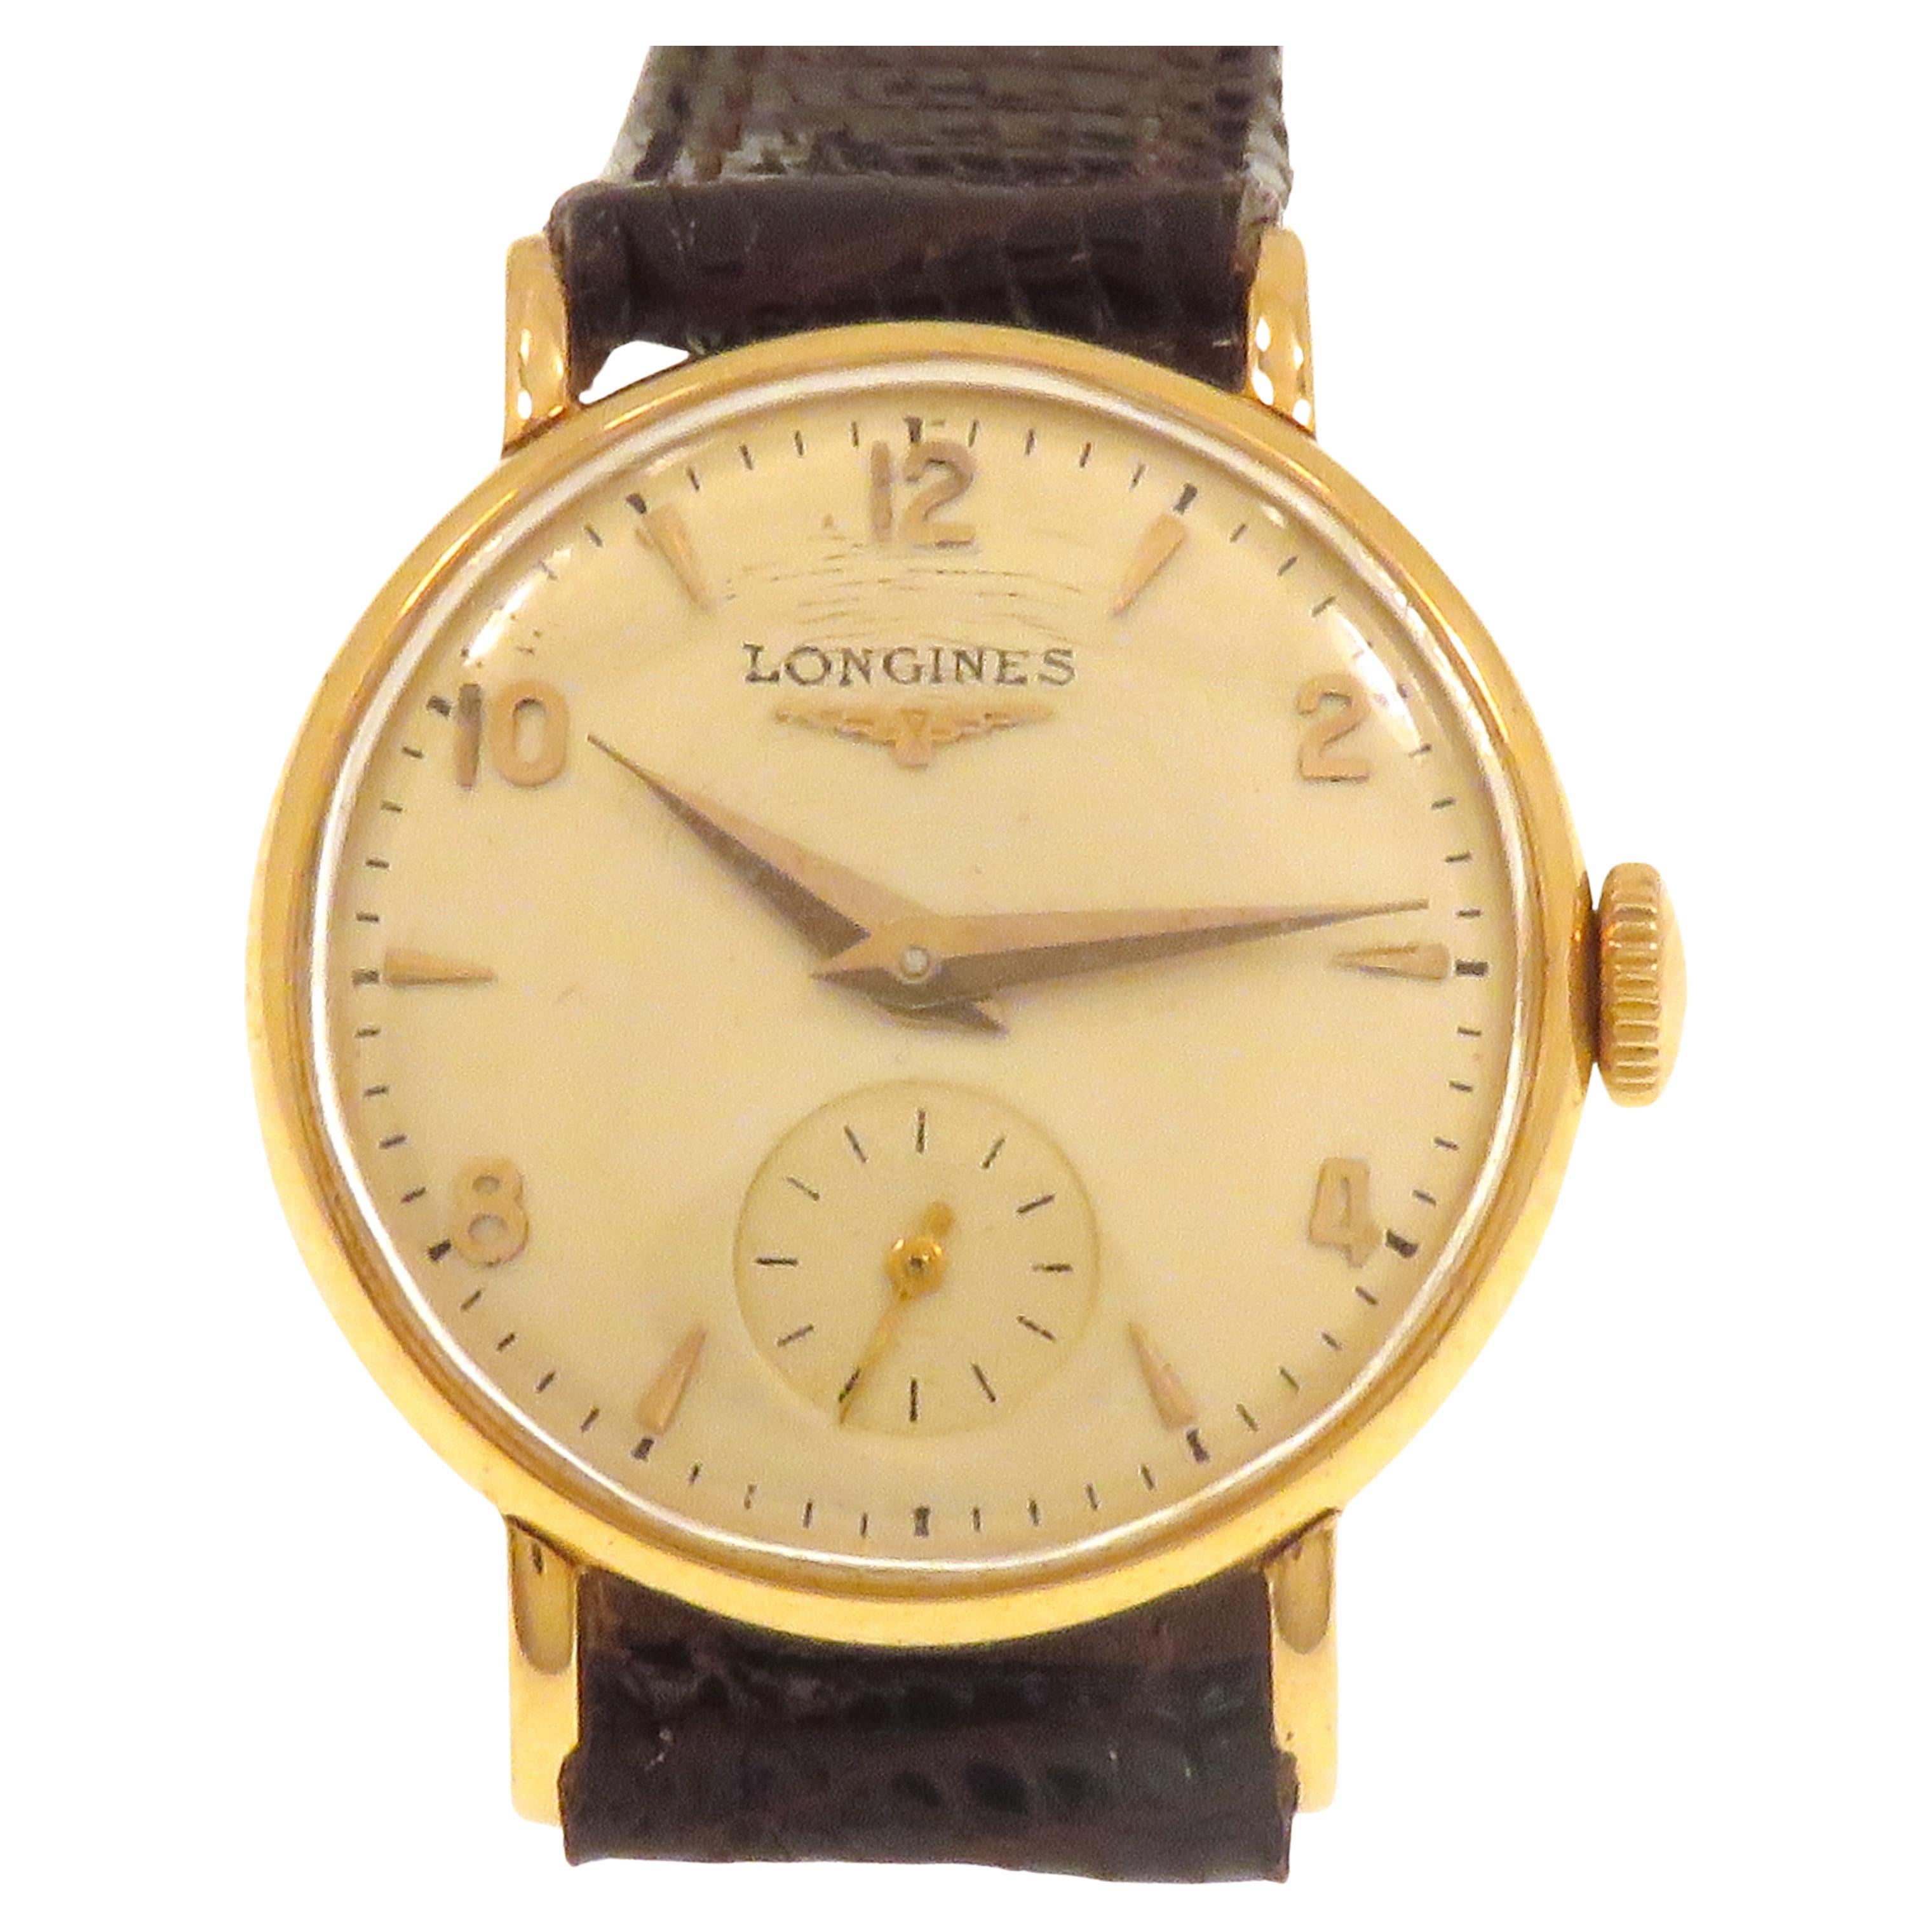 Longines 18k Yellow Gold Wrist Watch with Leather Strap